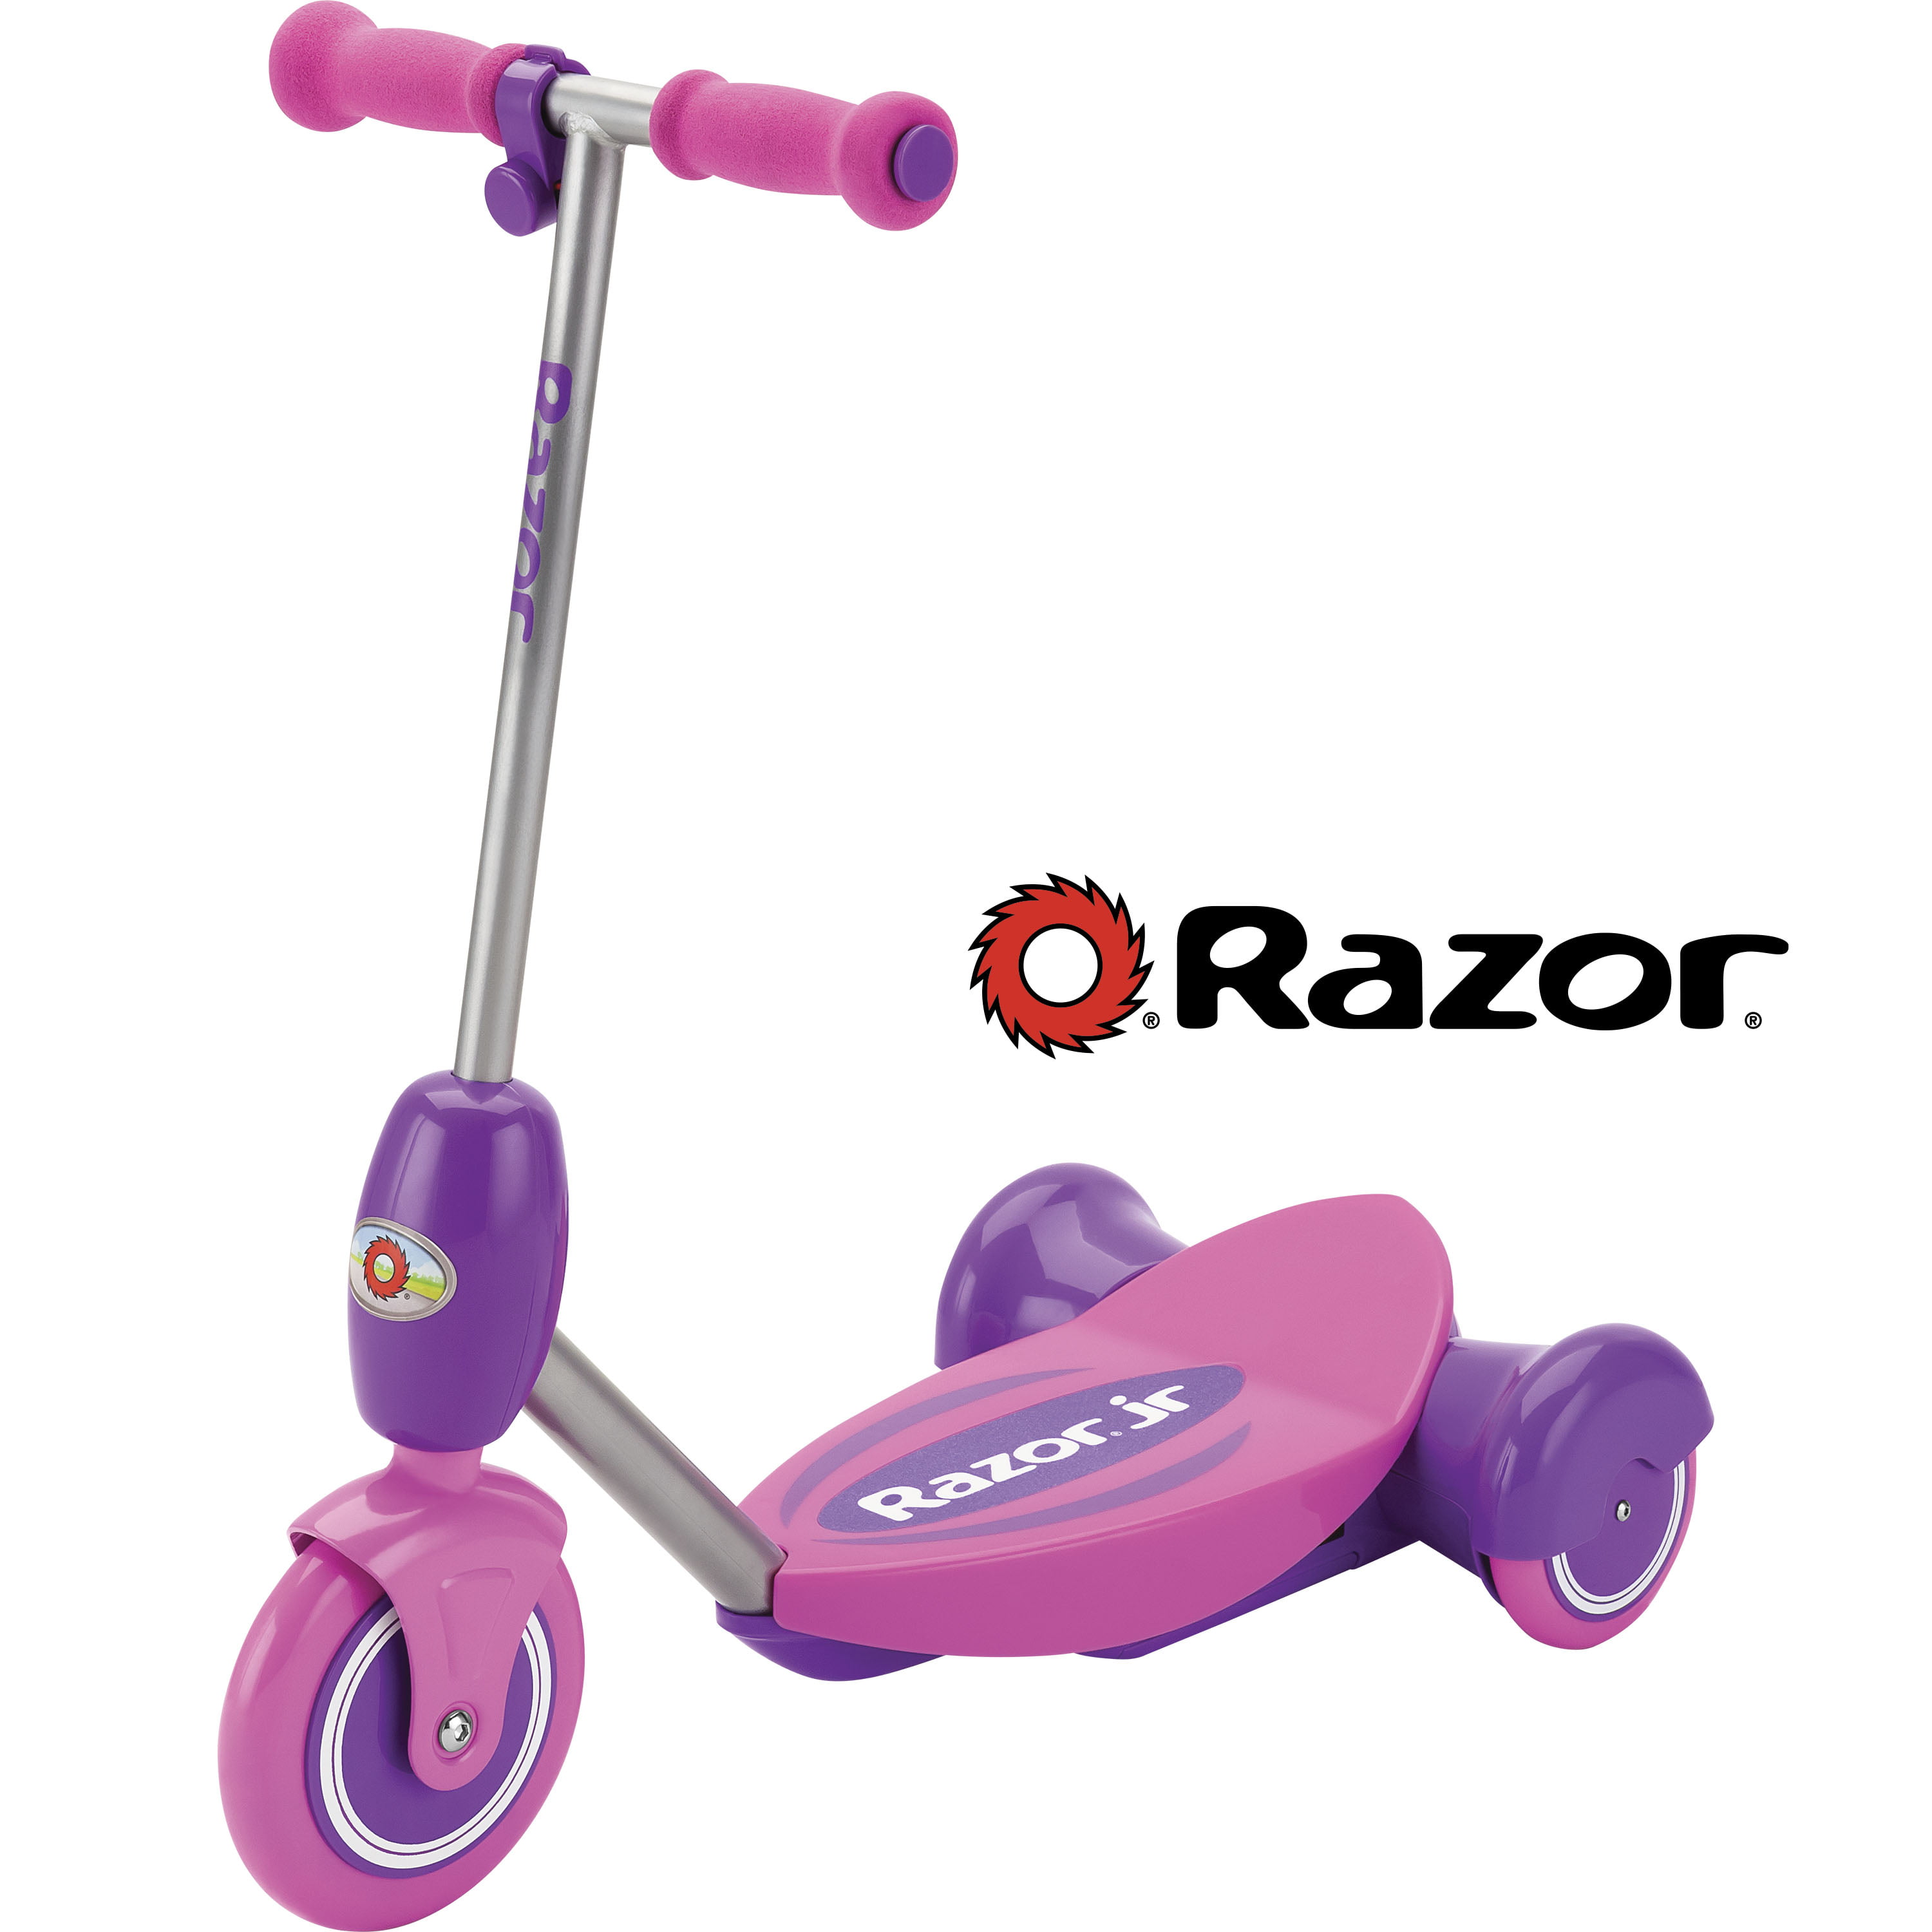 three wheel electric scooter for kids